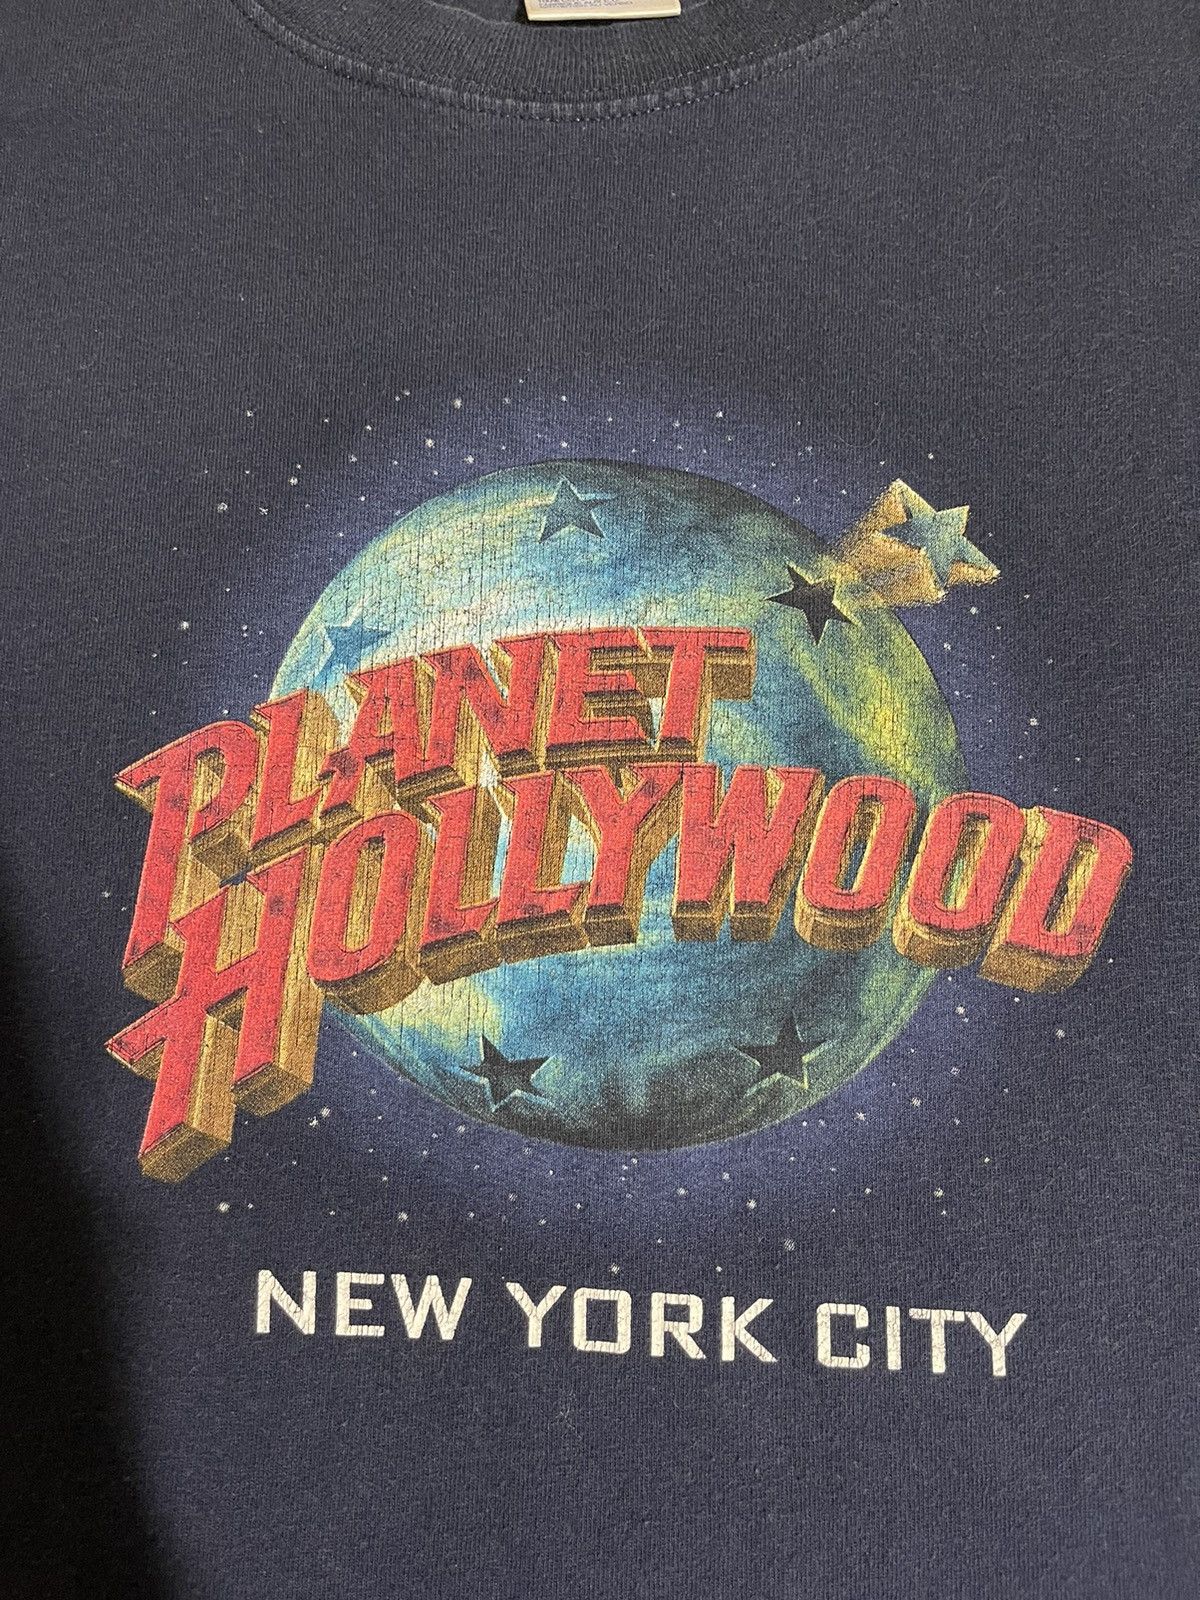 Planet Hollywood Vintage 1998 Planet Hollywood Tee Size US S / EU 44-46 / 1 - 2 Preview